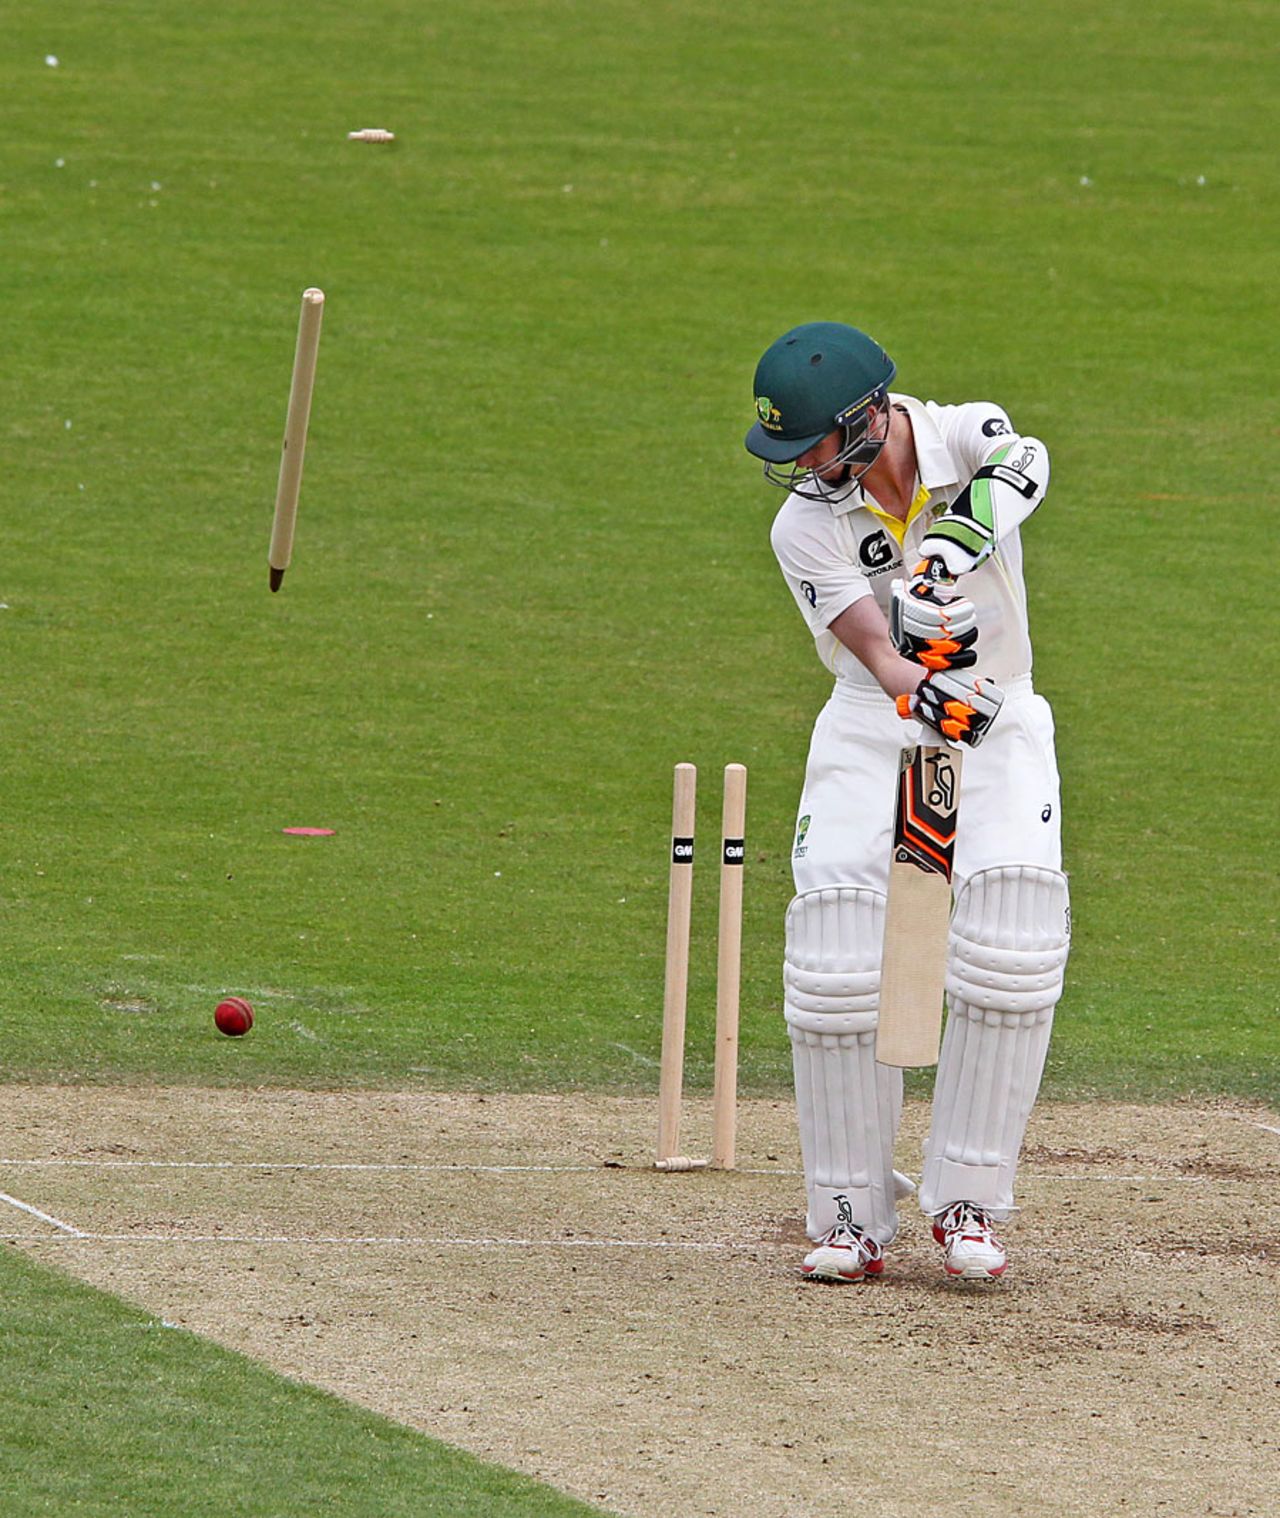 Sam Grimwade loses his off stump, England U-19s v Australia U-19s, Youth Test, Chester-le-Street, 2nd day, August 5, 2015